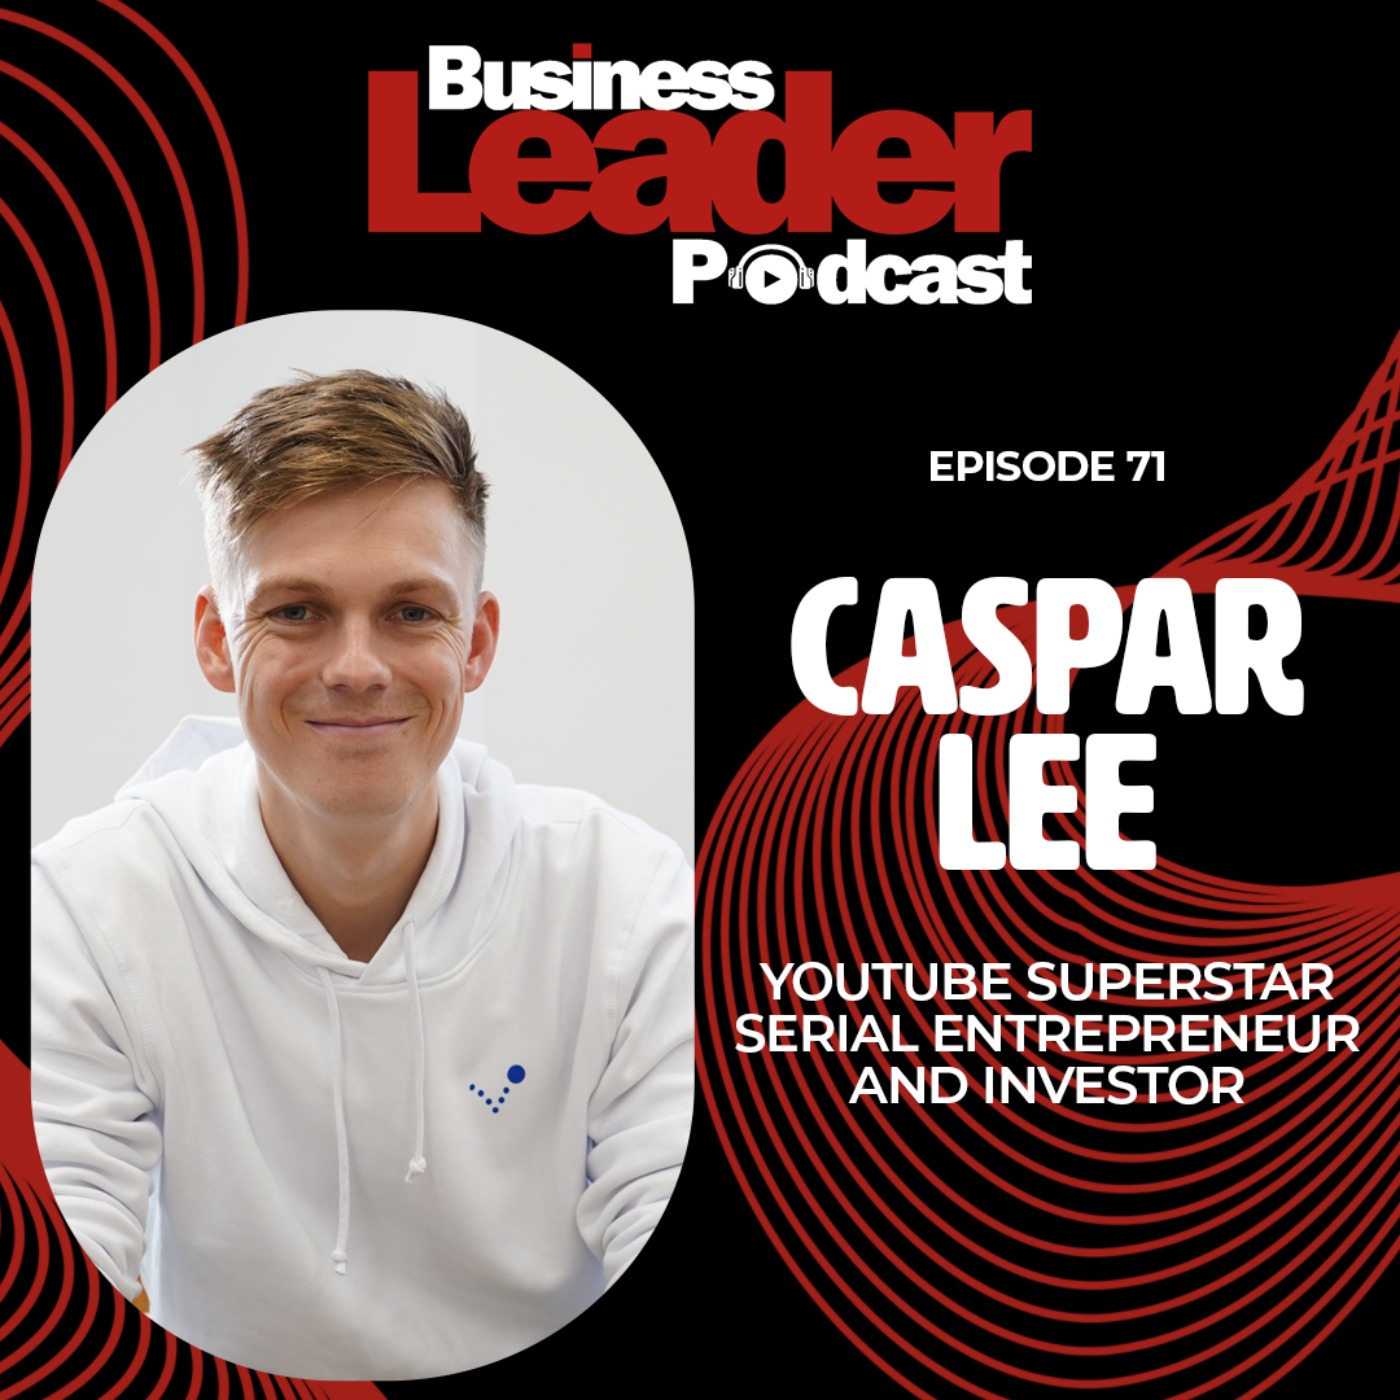 Caspar Lee: From content king to entrepreneur and investor